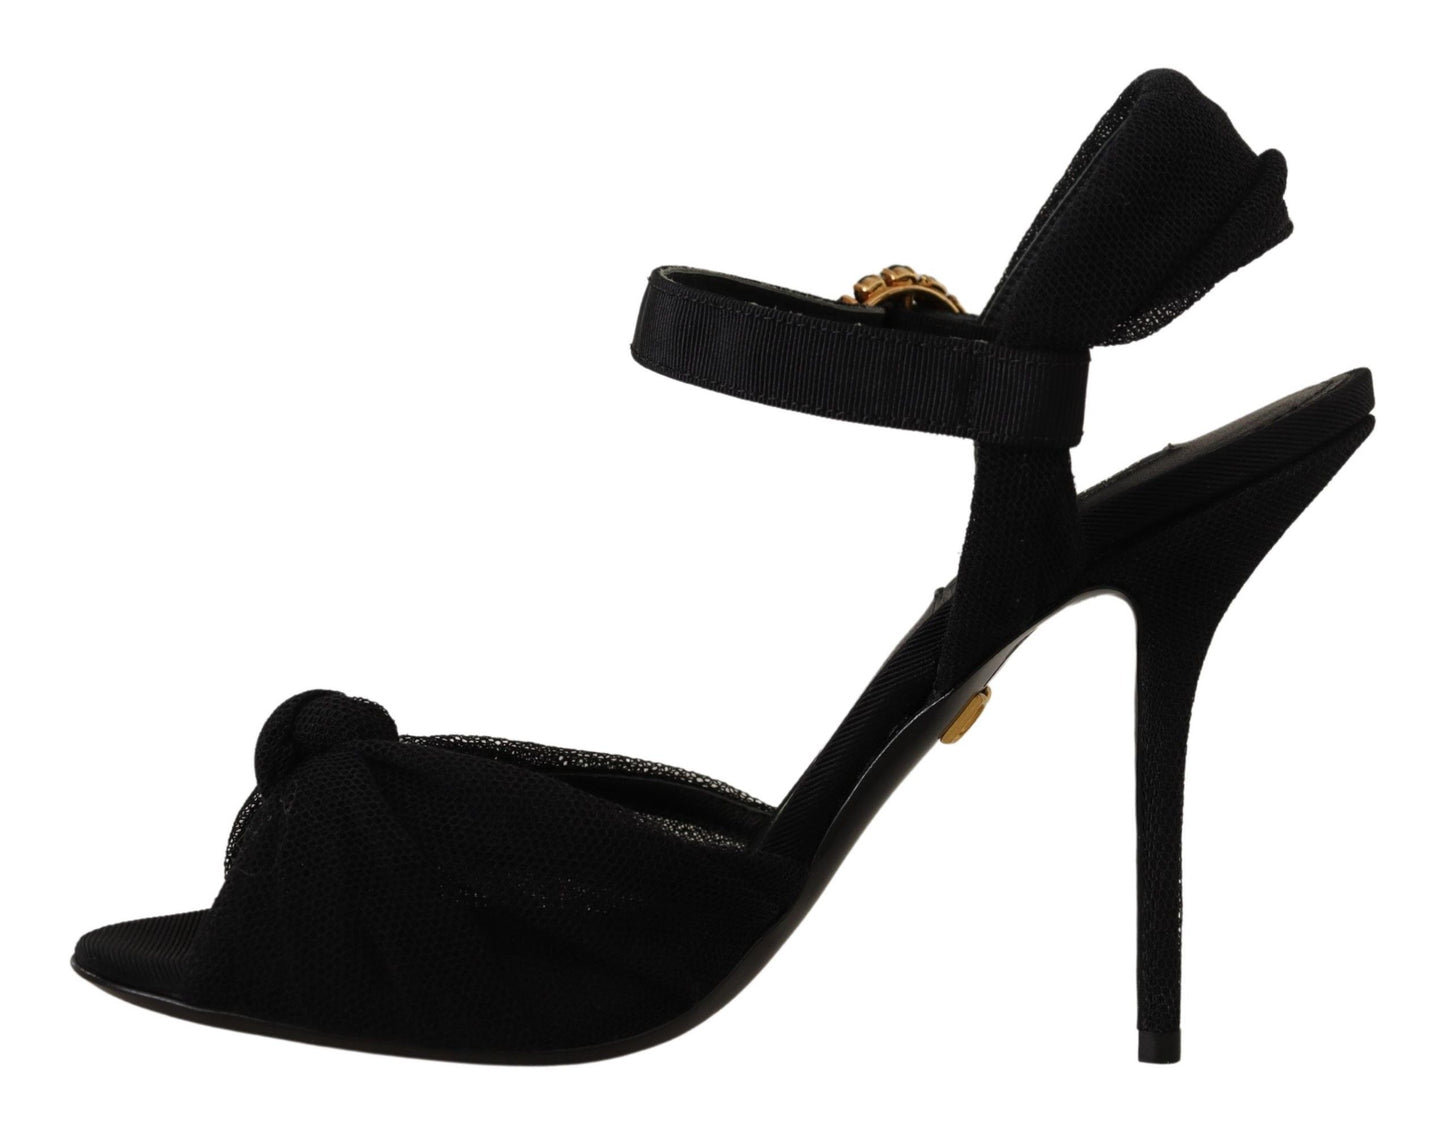 Dolce & Gabbana Black Tulle Ankle Strap Heels with Crystal Buckle